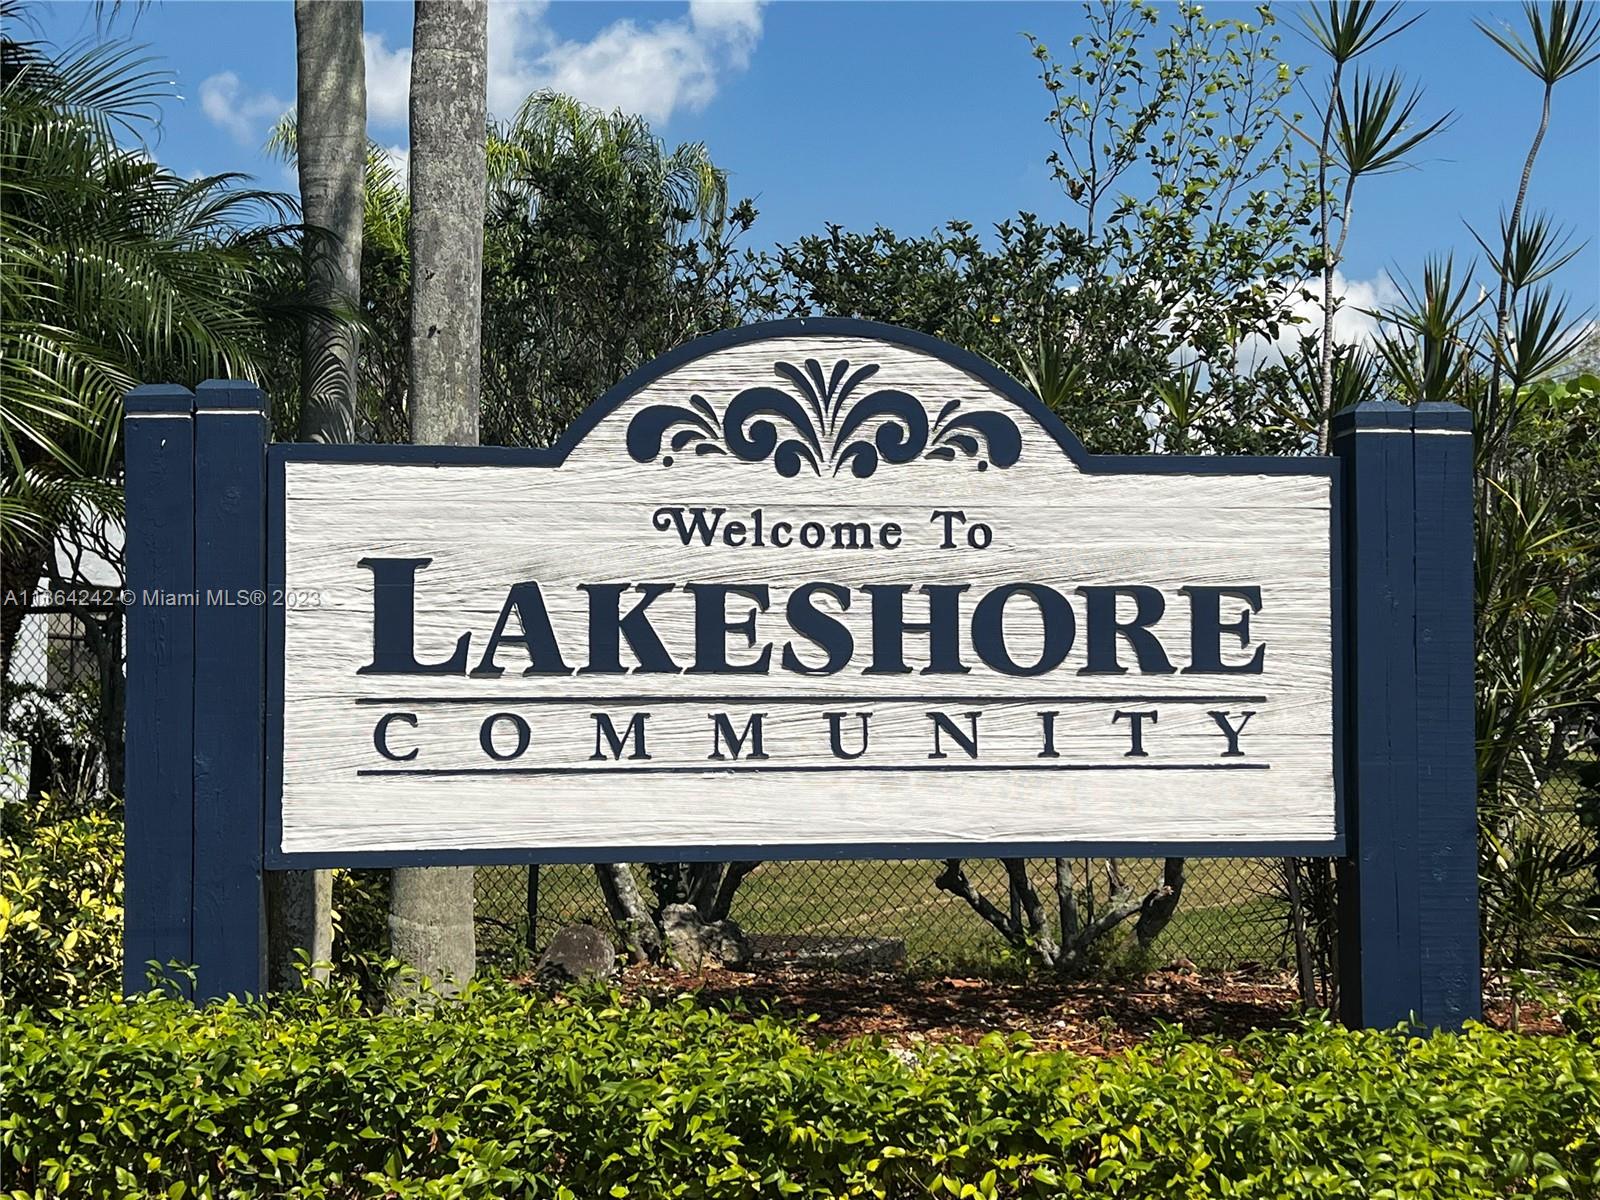 Rarely available 1 story 3 bedroom condo in gated community.  Needs a little TLC. Enjoy all lakeshore amenities.  No Asssociation approval process required, only registration.